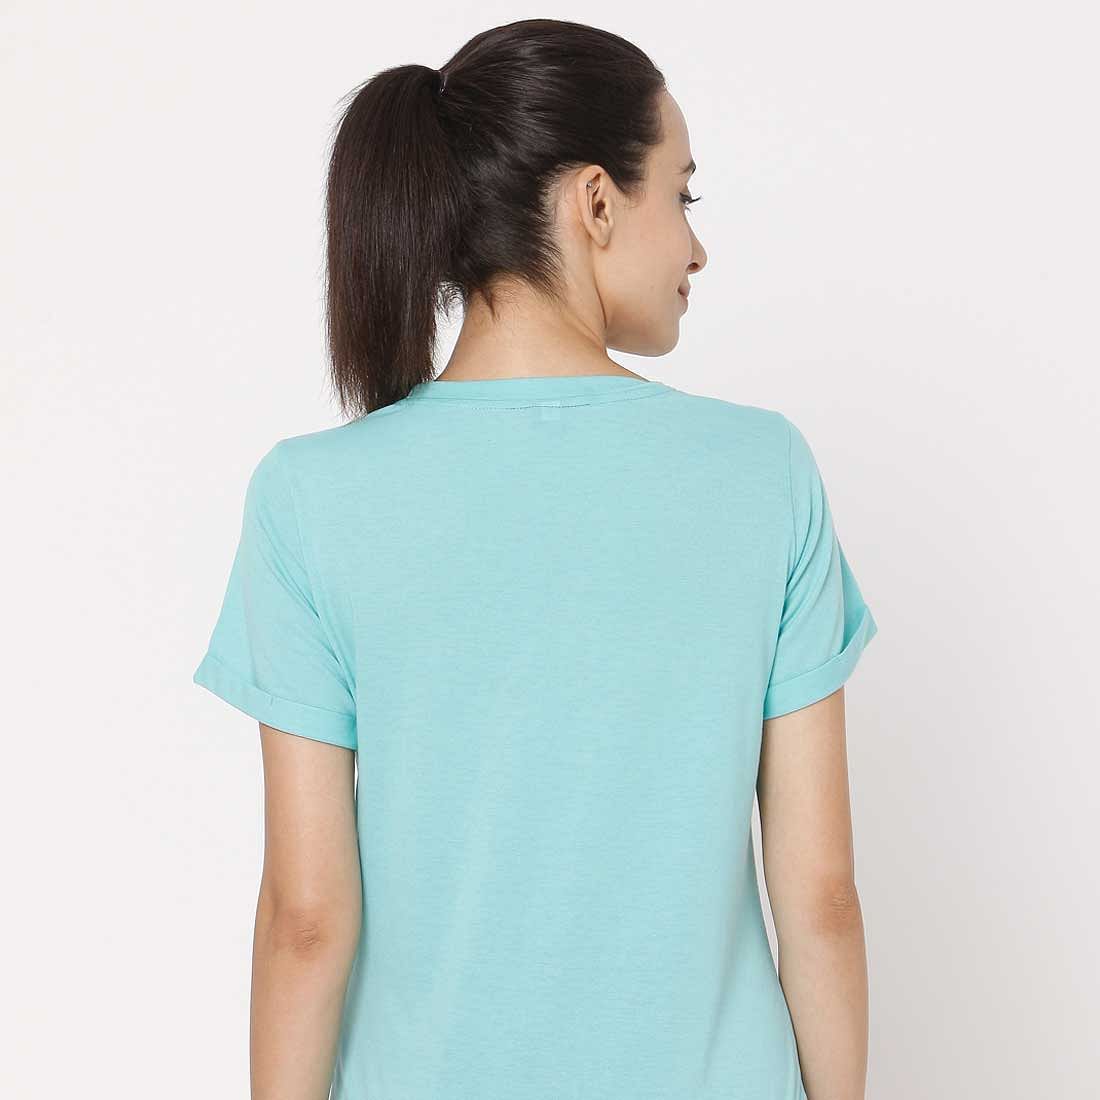 Basic T Shirts For Women Pune City Tees - Made In Pune Nutcase